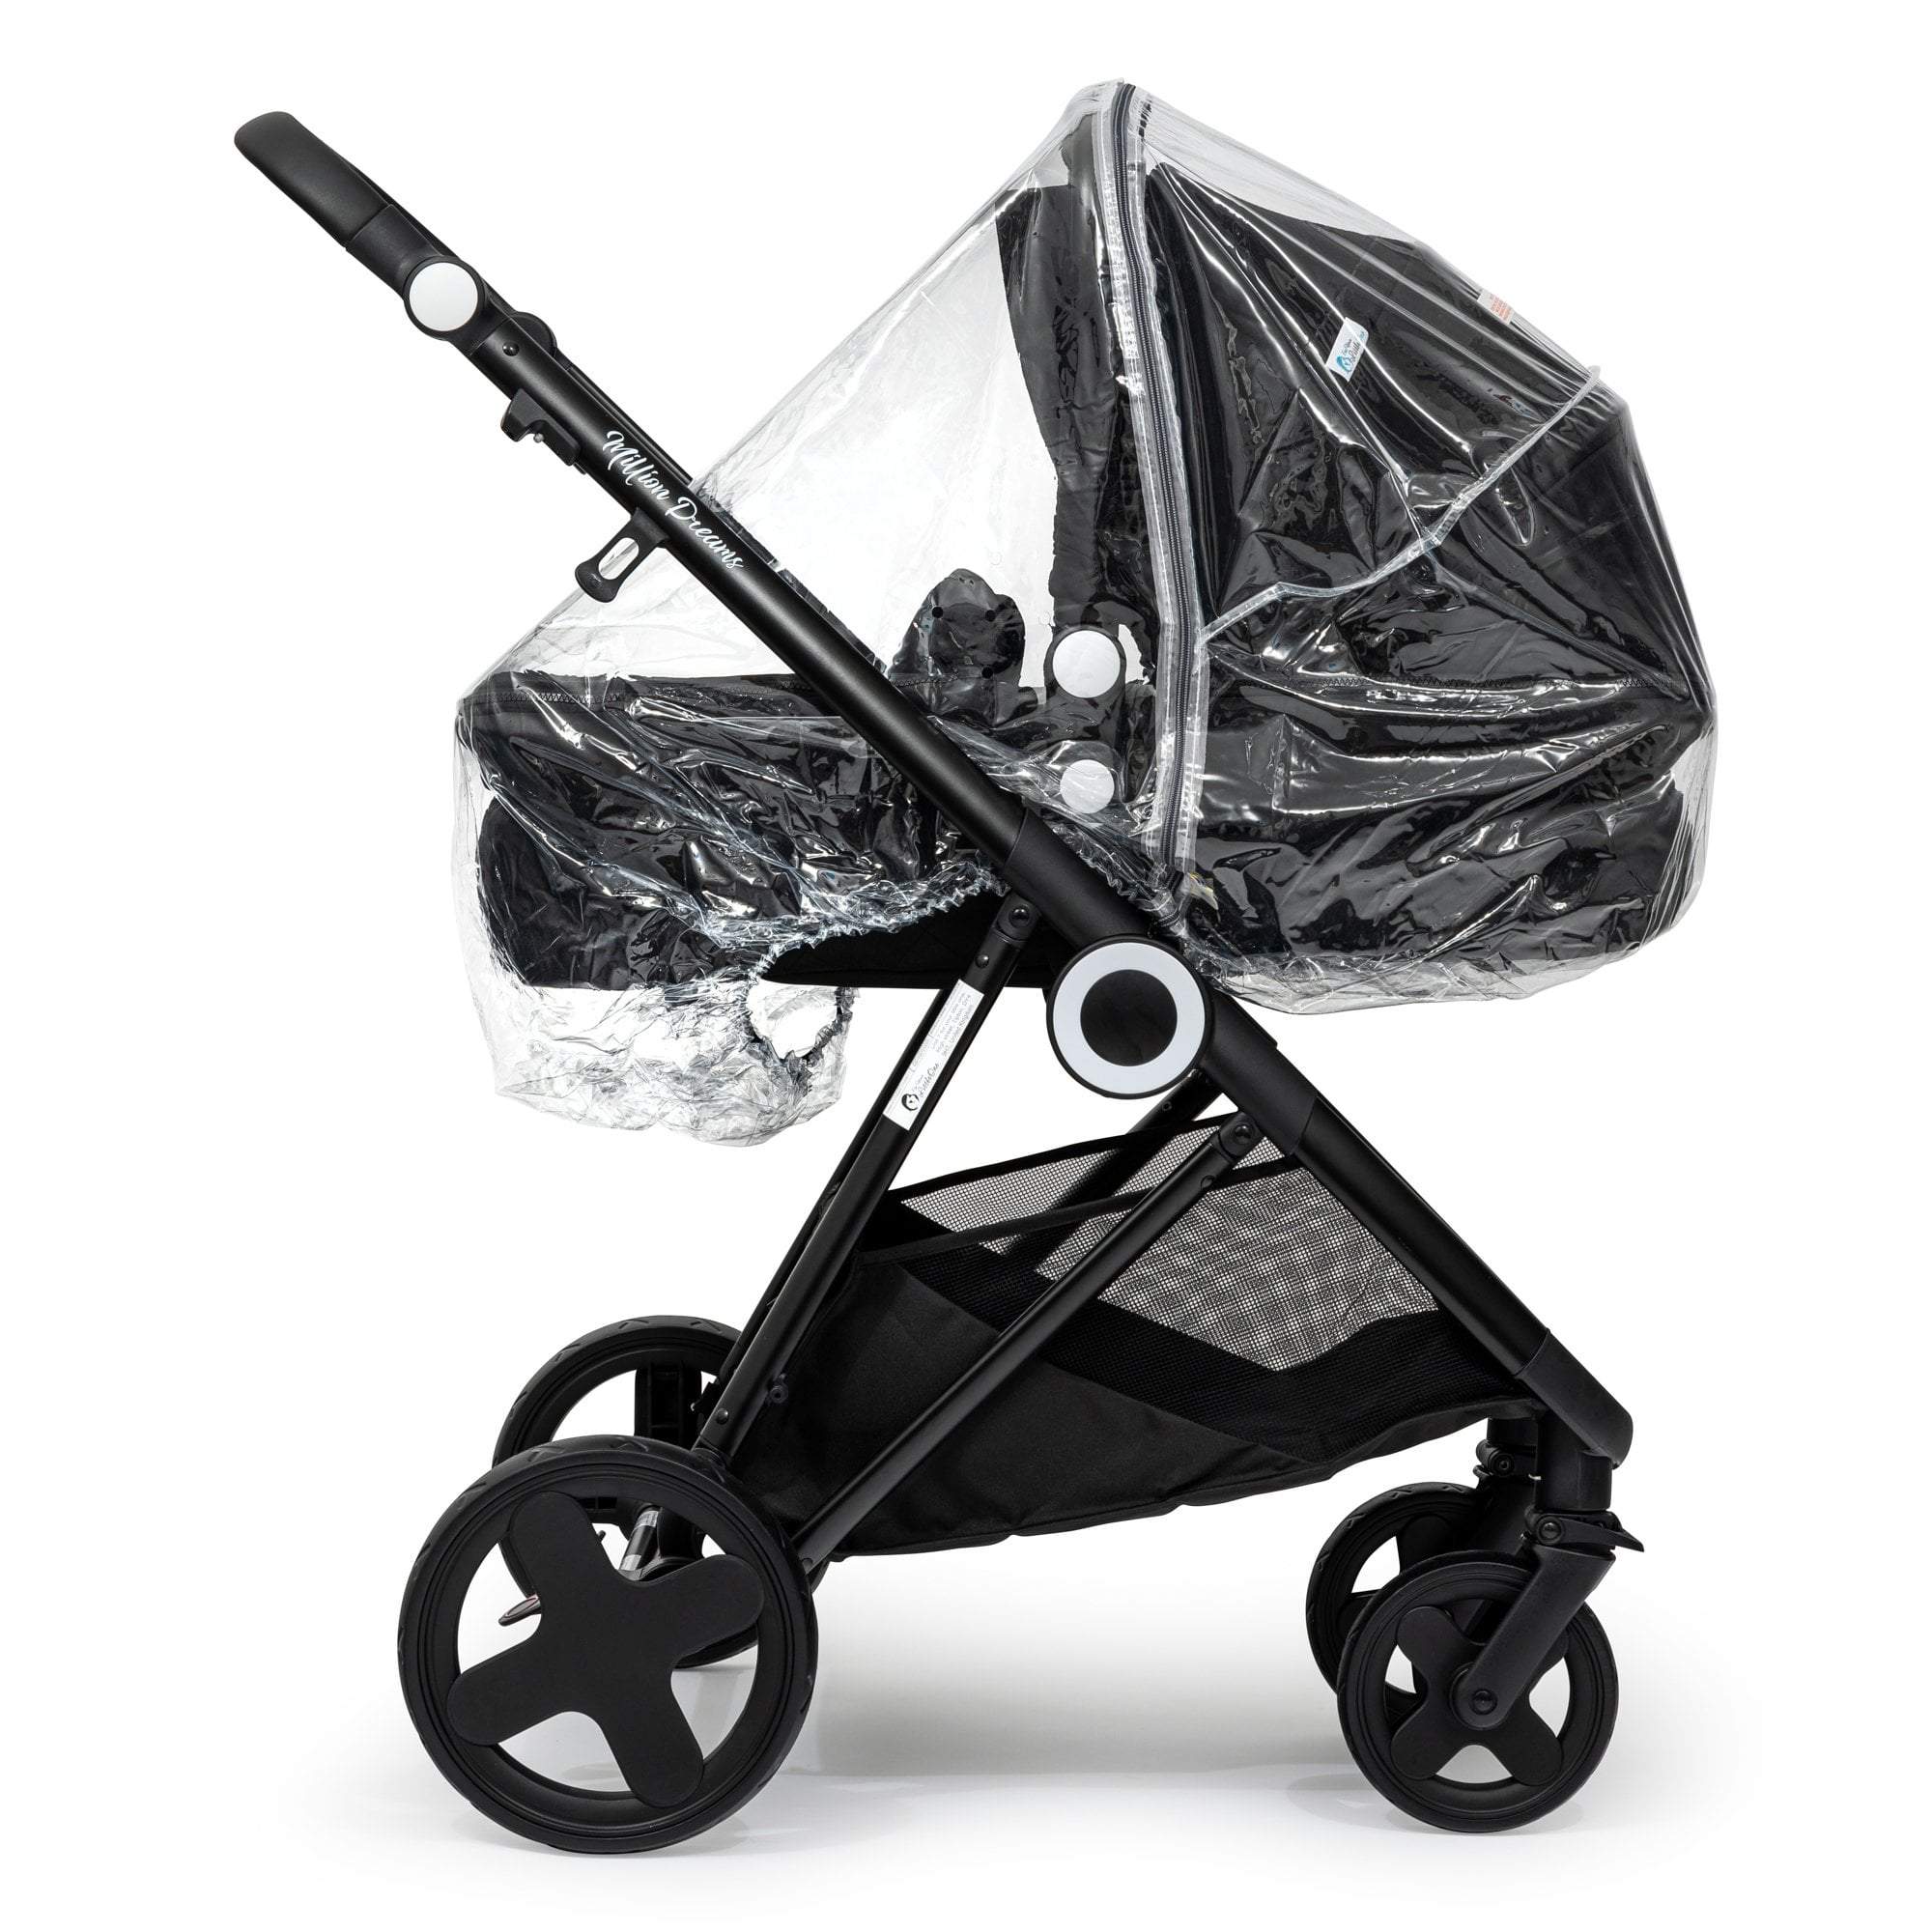 Carrycot Raincover Compatible With Maclaren - Fits All Models - For Your Little One